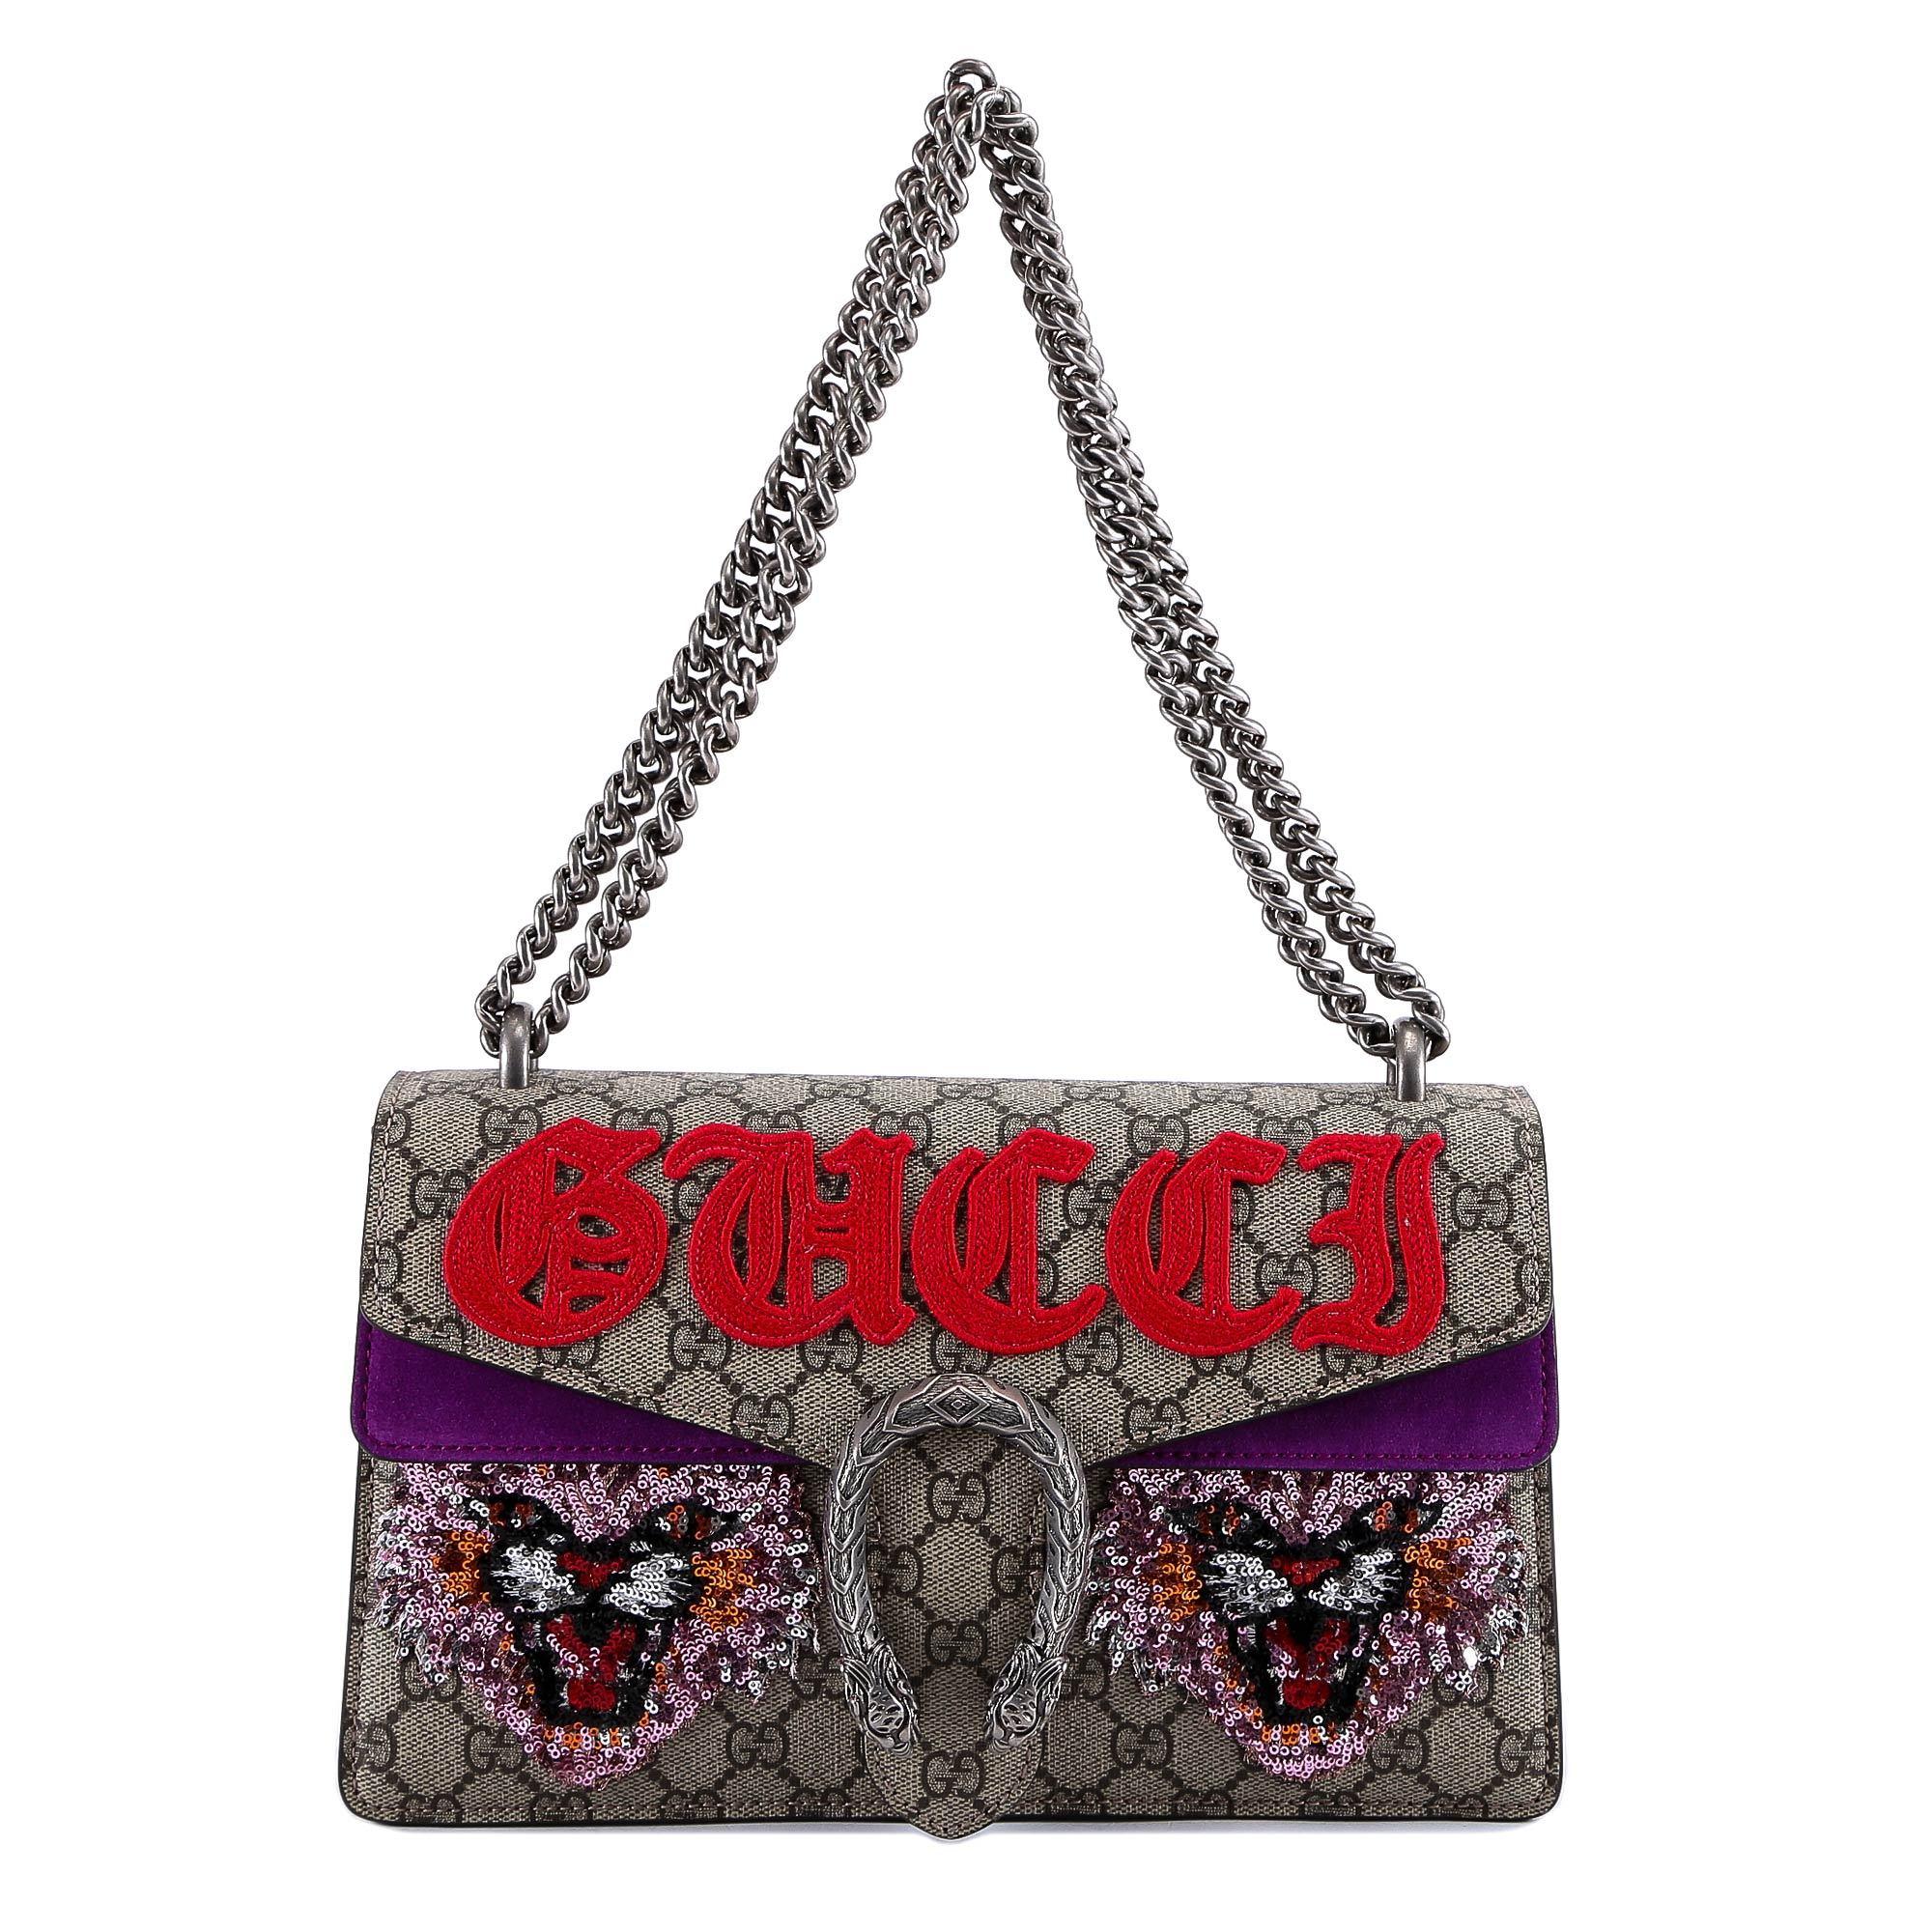 GUCCI Dionysus GG Supreme Bag with Red